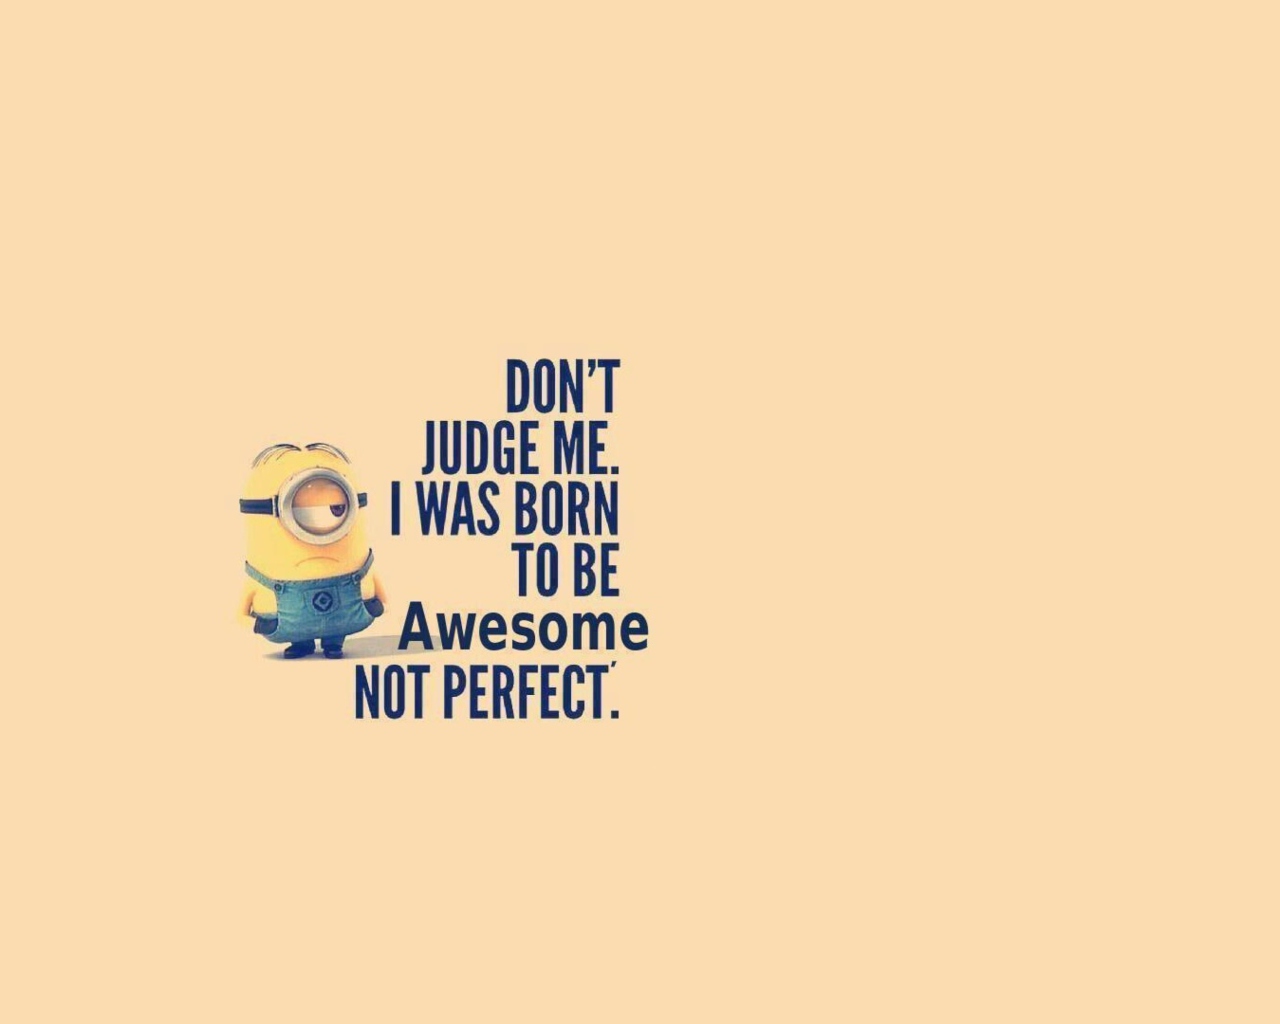 Awesome Not Perfect wallpaper 1280x1024